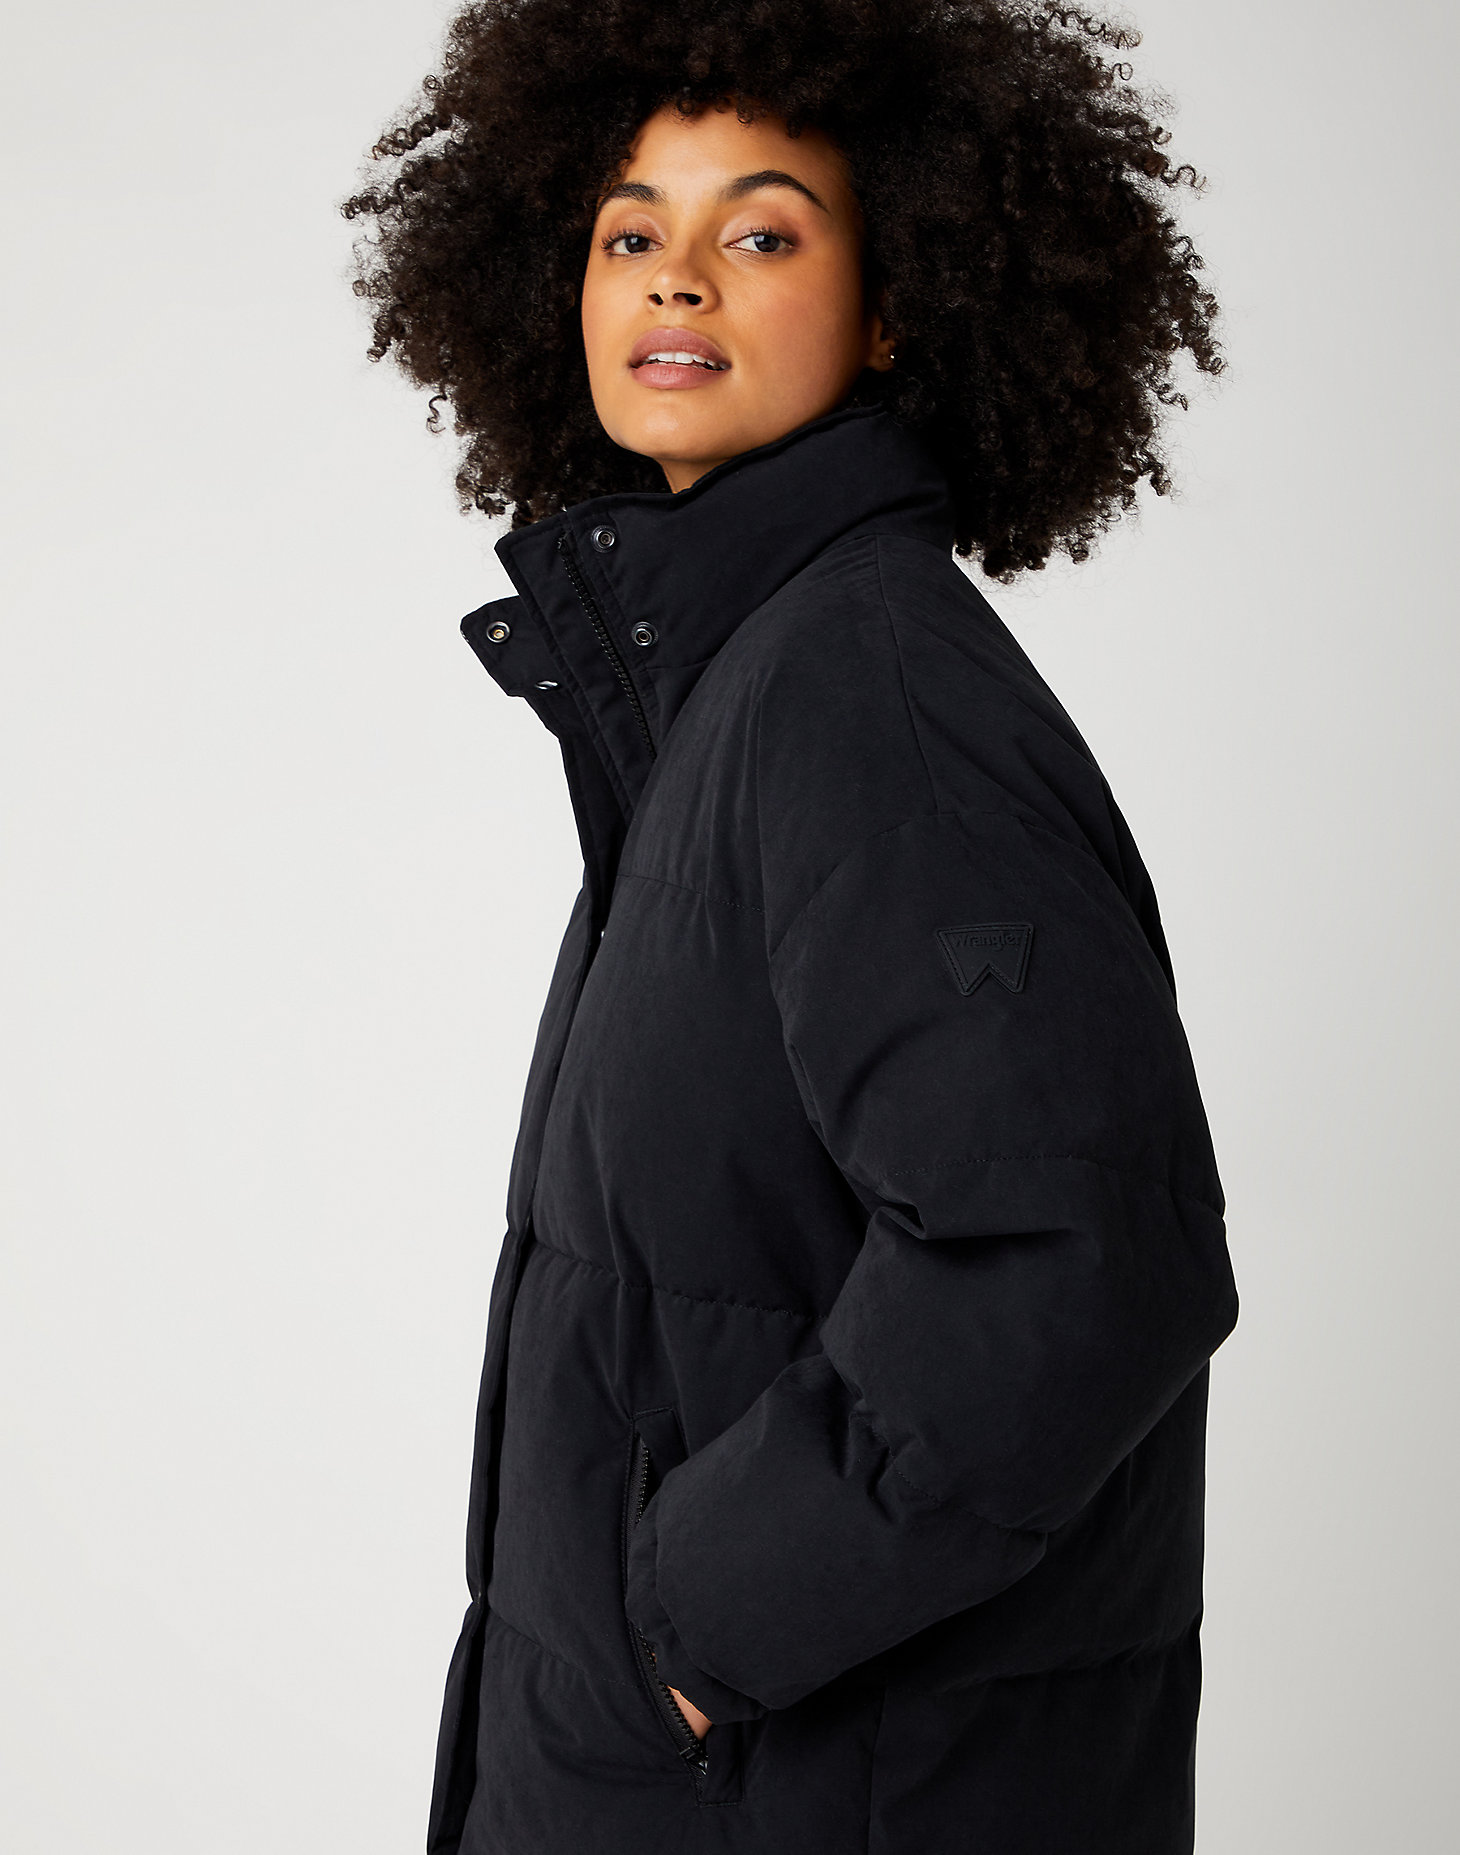 Relaxed Puffer in Black alternative view 3